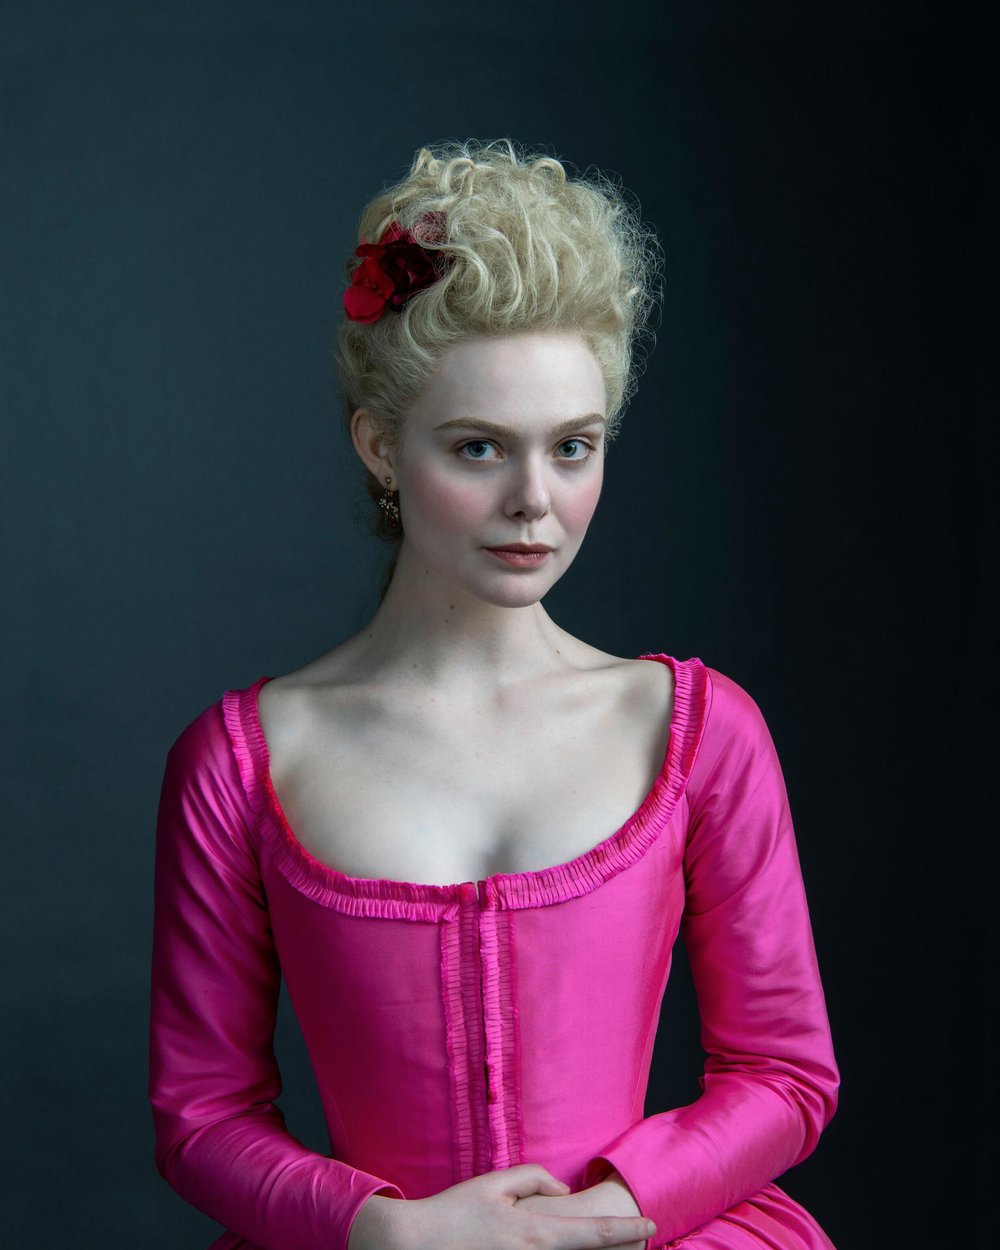 Elle Fanning as Catherine the Great in "The Great" on Hulu - Hannah recommends